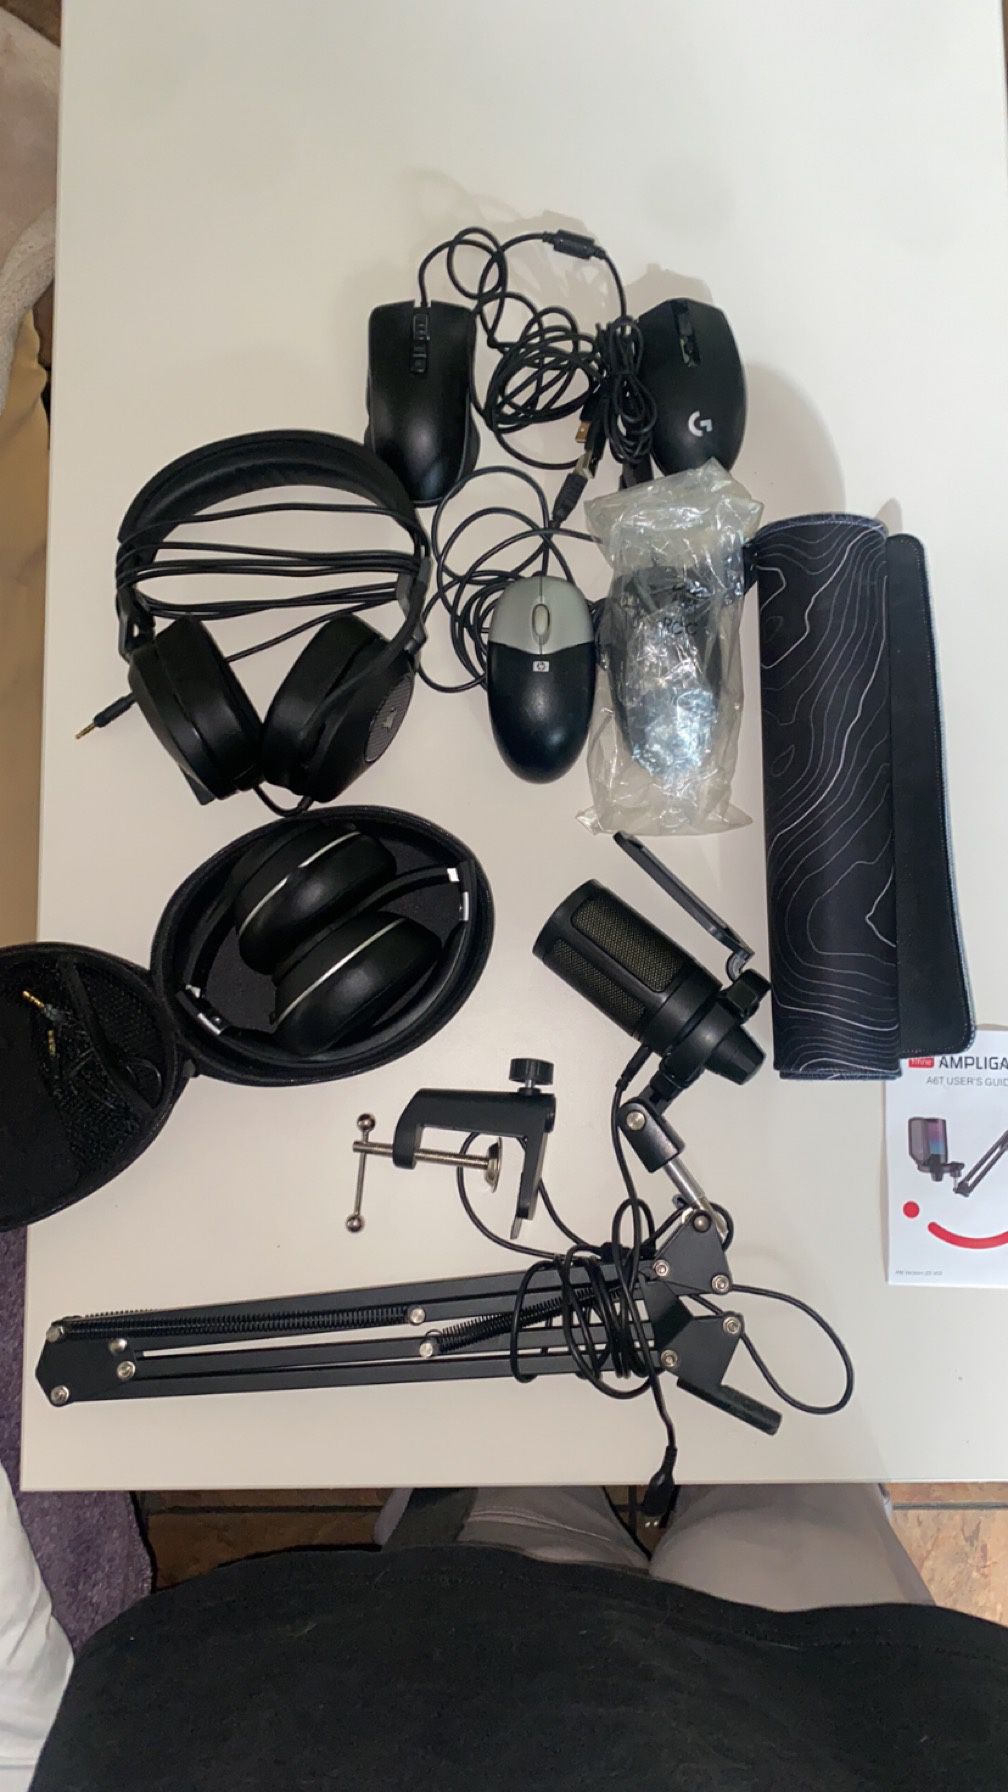 Many Gaming Accessories (Price Negotiable)